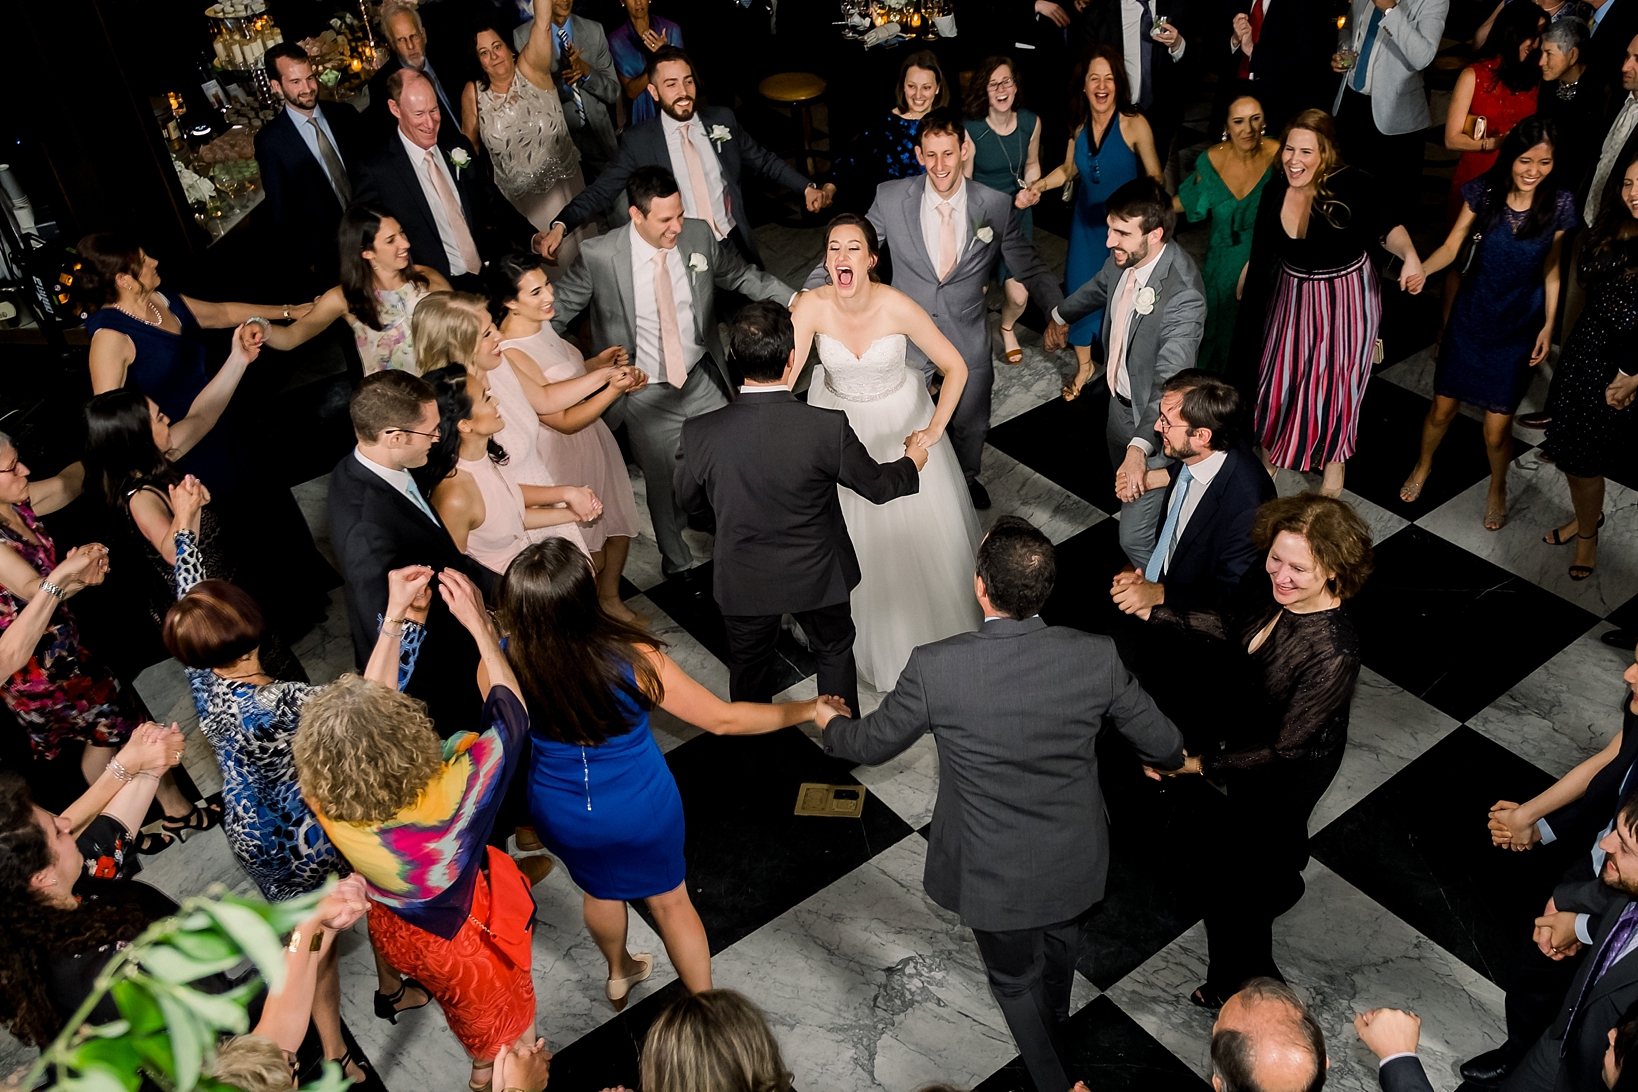 The dance party during this oxford exchange wedding day was one to remember as people groove on the dance floor